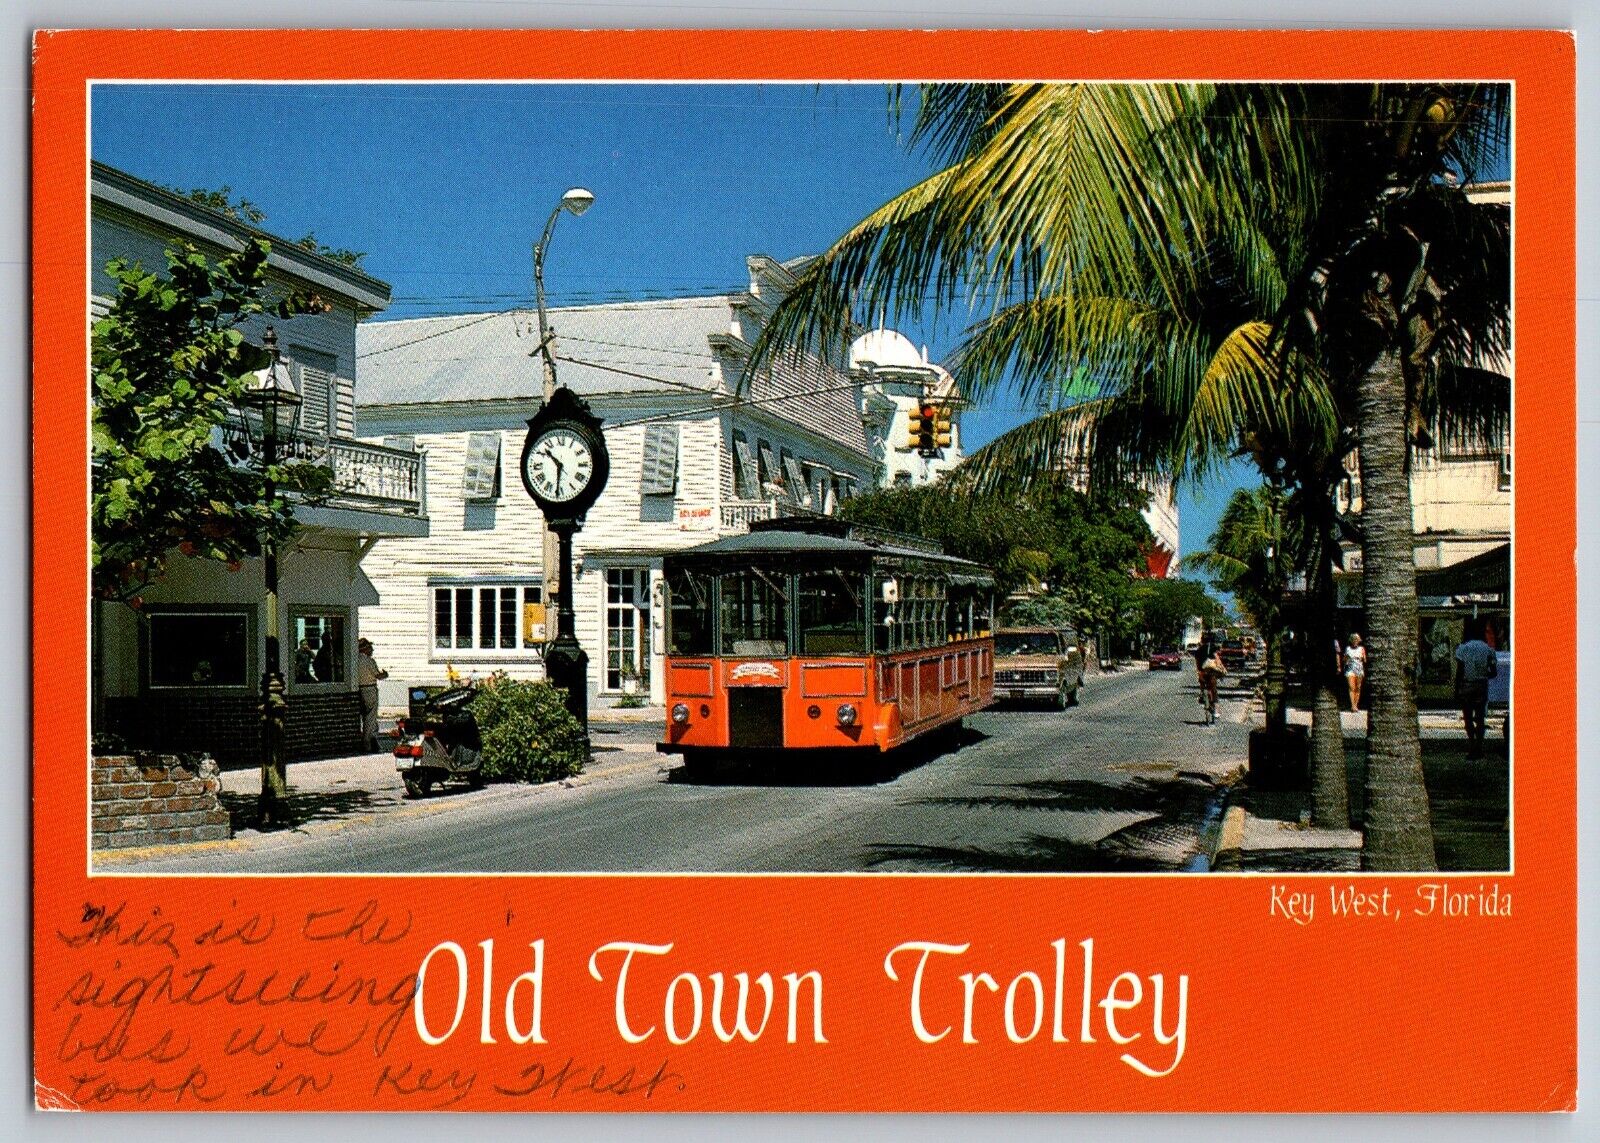 Key West, Florida - Trolley Car at Old Town - Vintage Postcard 4x6 - Unposted